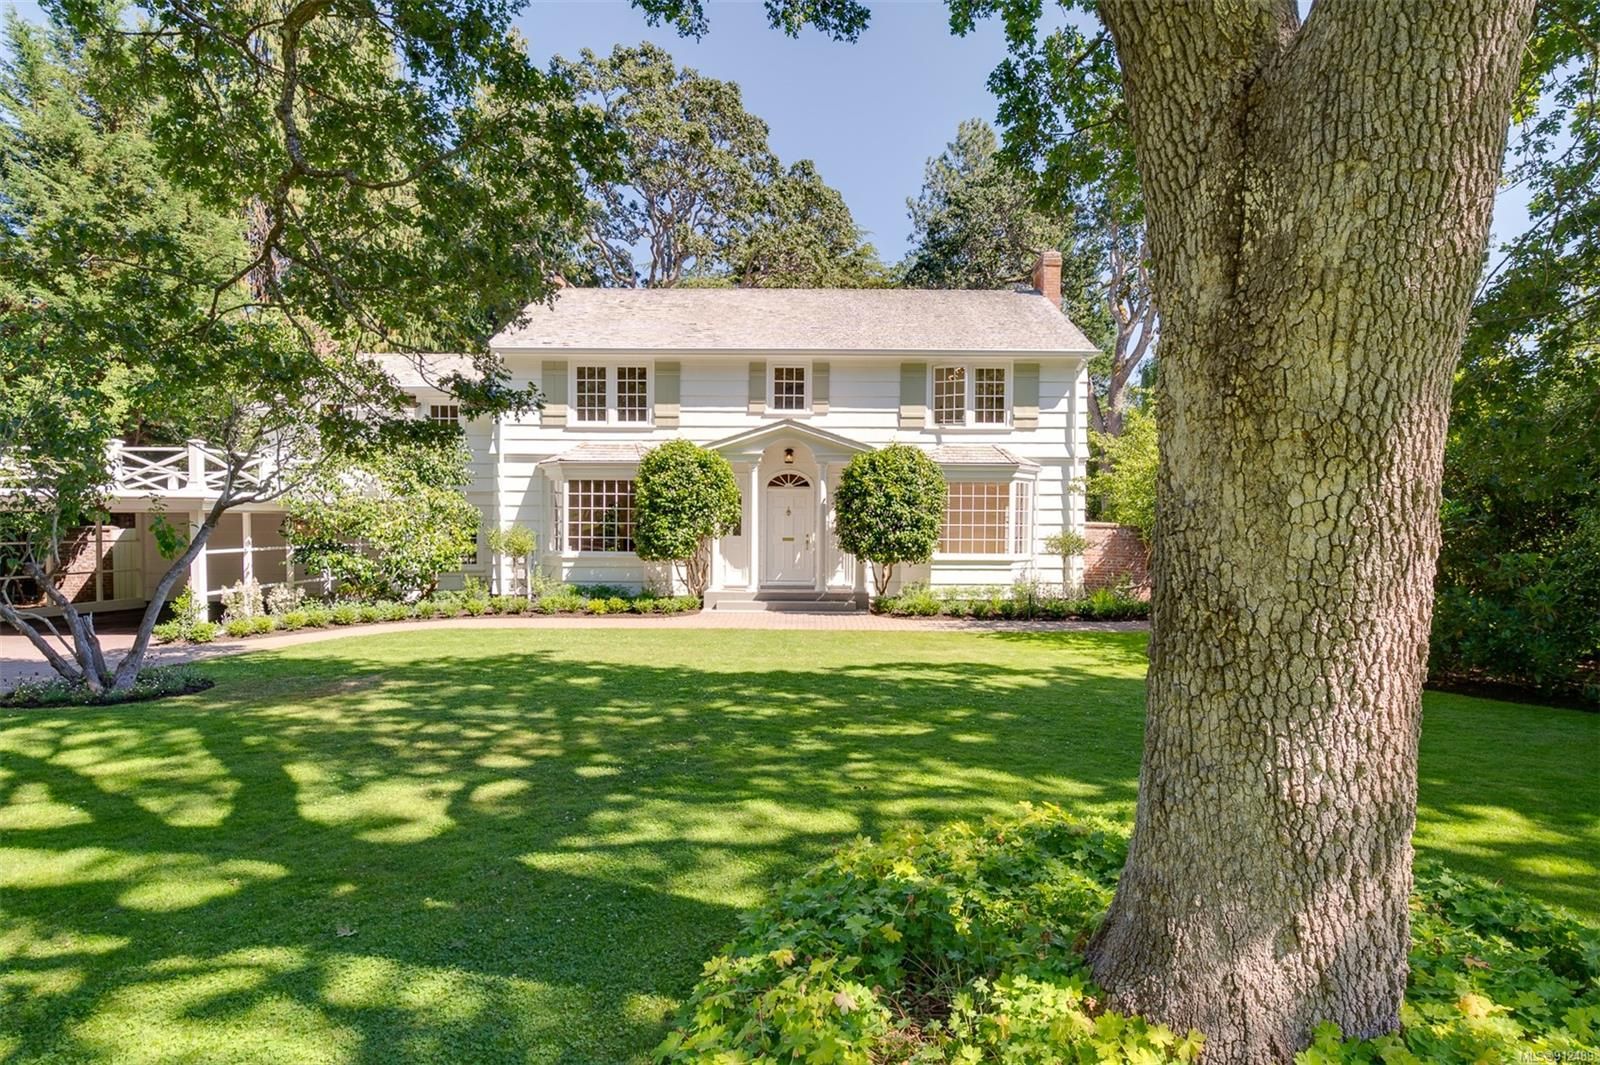 Classic Colonial Family Home on .49 acre garden. Rounded lavender plants add structure + sweetly scent the walkway. 3275 Uplands Road, Victoria BC V8R 6B8